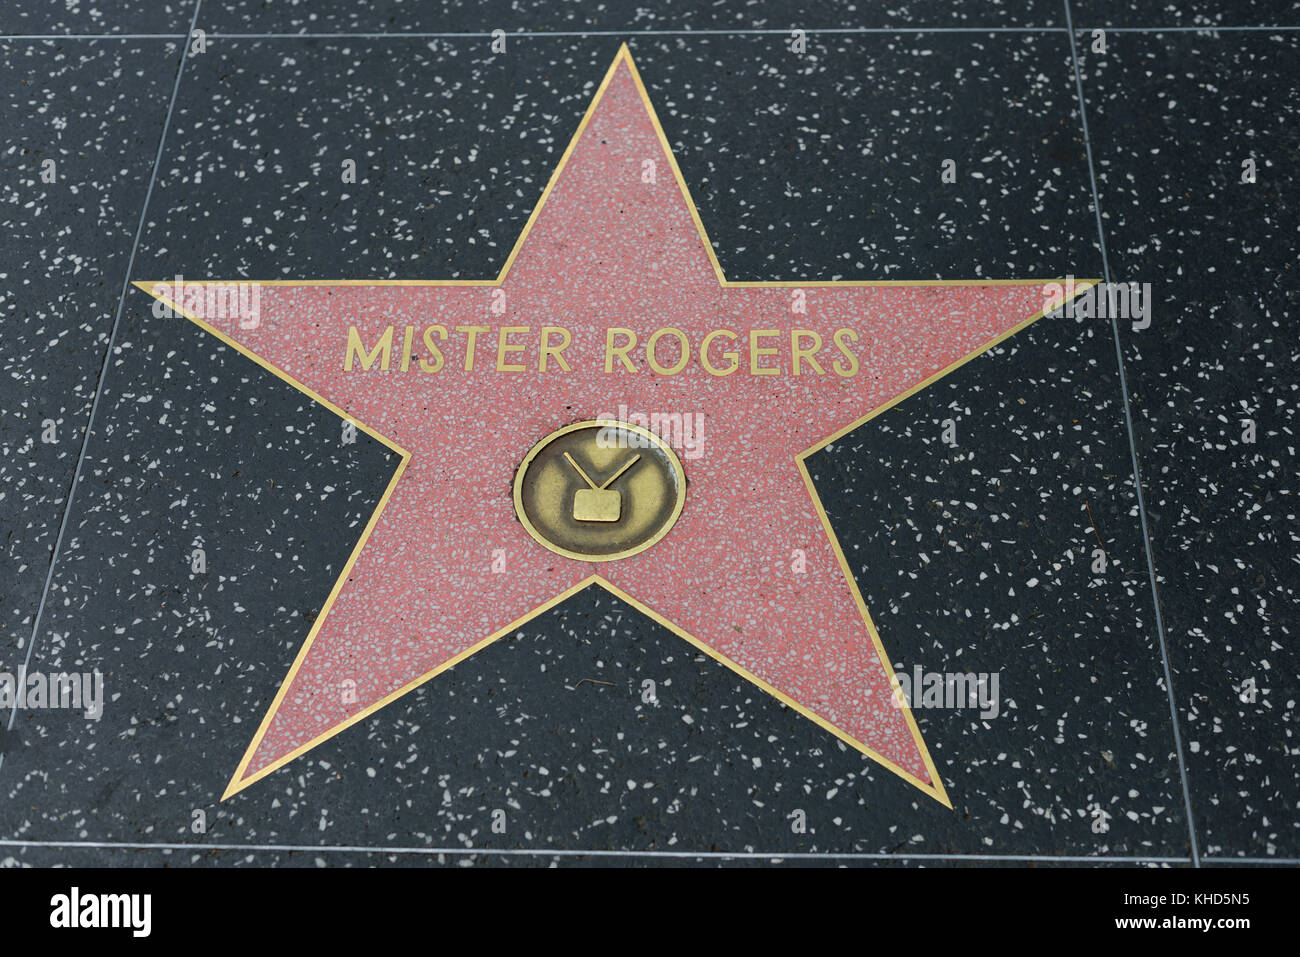 HOLLYWOOD, CA - DICEMBRE 06: Mister Rogers star on the Hollywood Walk of Fame a Hollywood, California il 6 dicembre 2016. Foto Stock